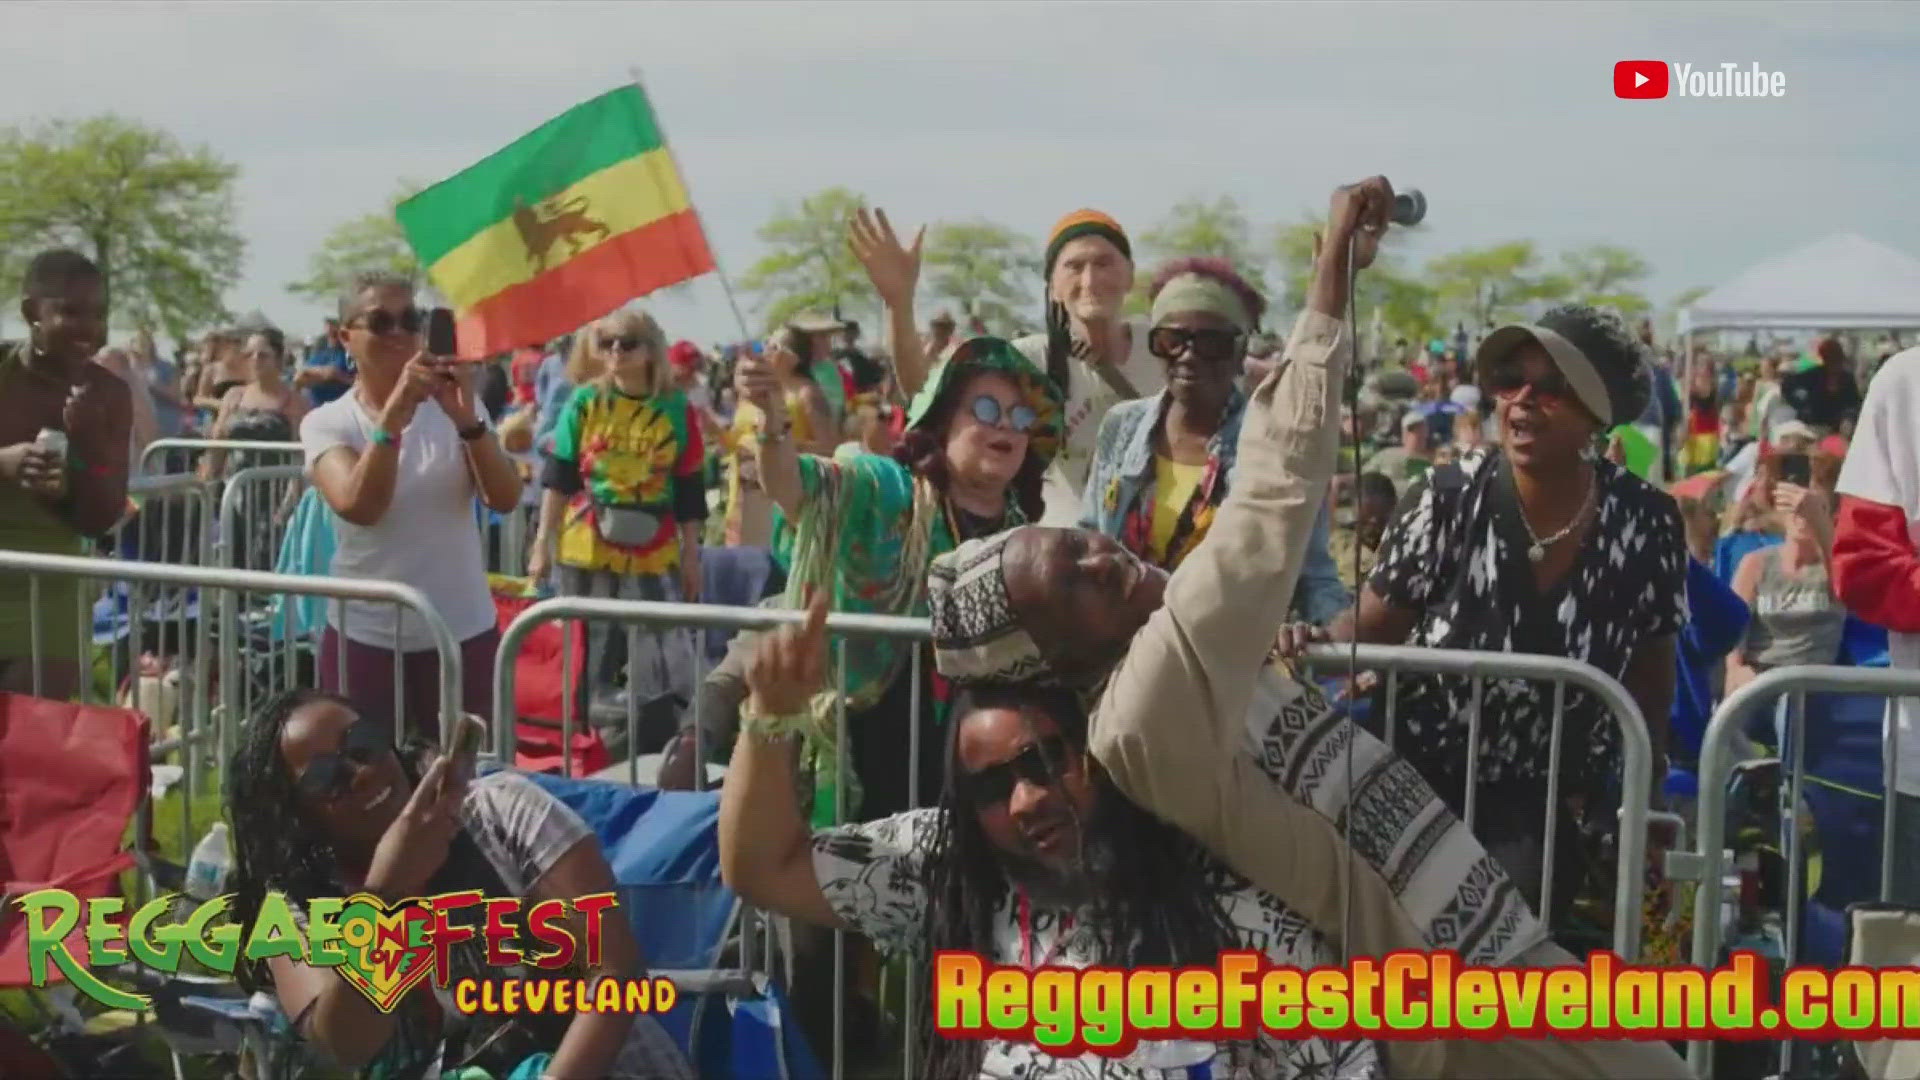 Reggae Fest Cleveland is back, and for the first time, this year's event will last two days. Mighty Mystic, one of the performers, speaks with 3News about the event.